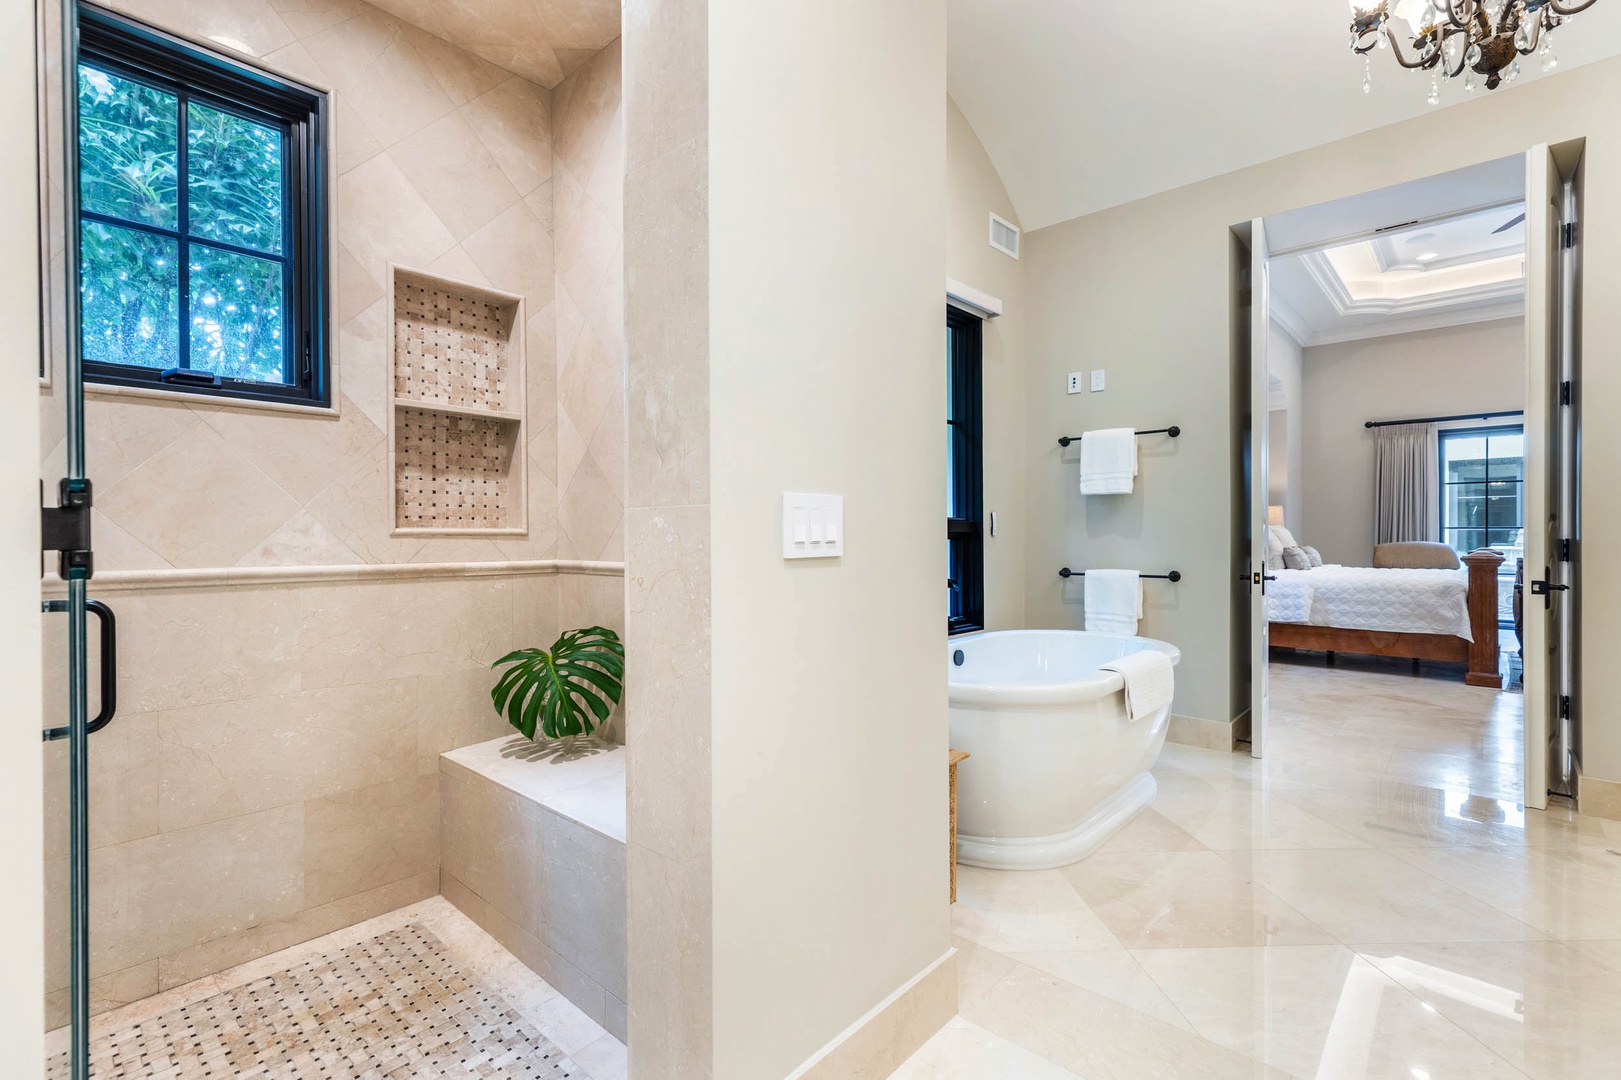 Honolulu Vacation Rentals, The Kahala Mansion - Spa-like ensuite bathroom with a large soaking tub for unwinding at the end of the day.